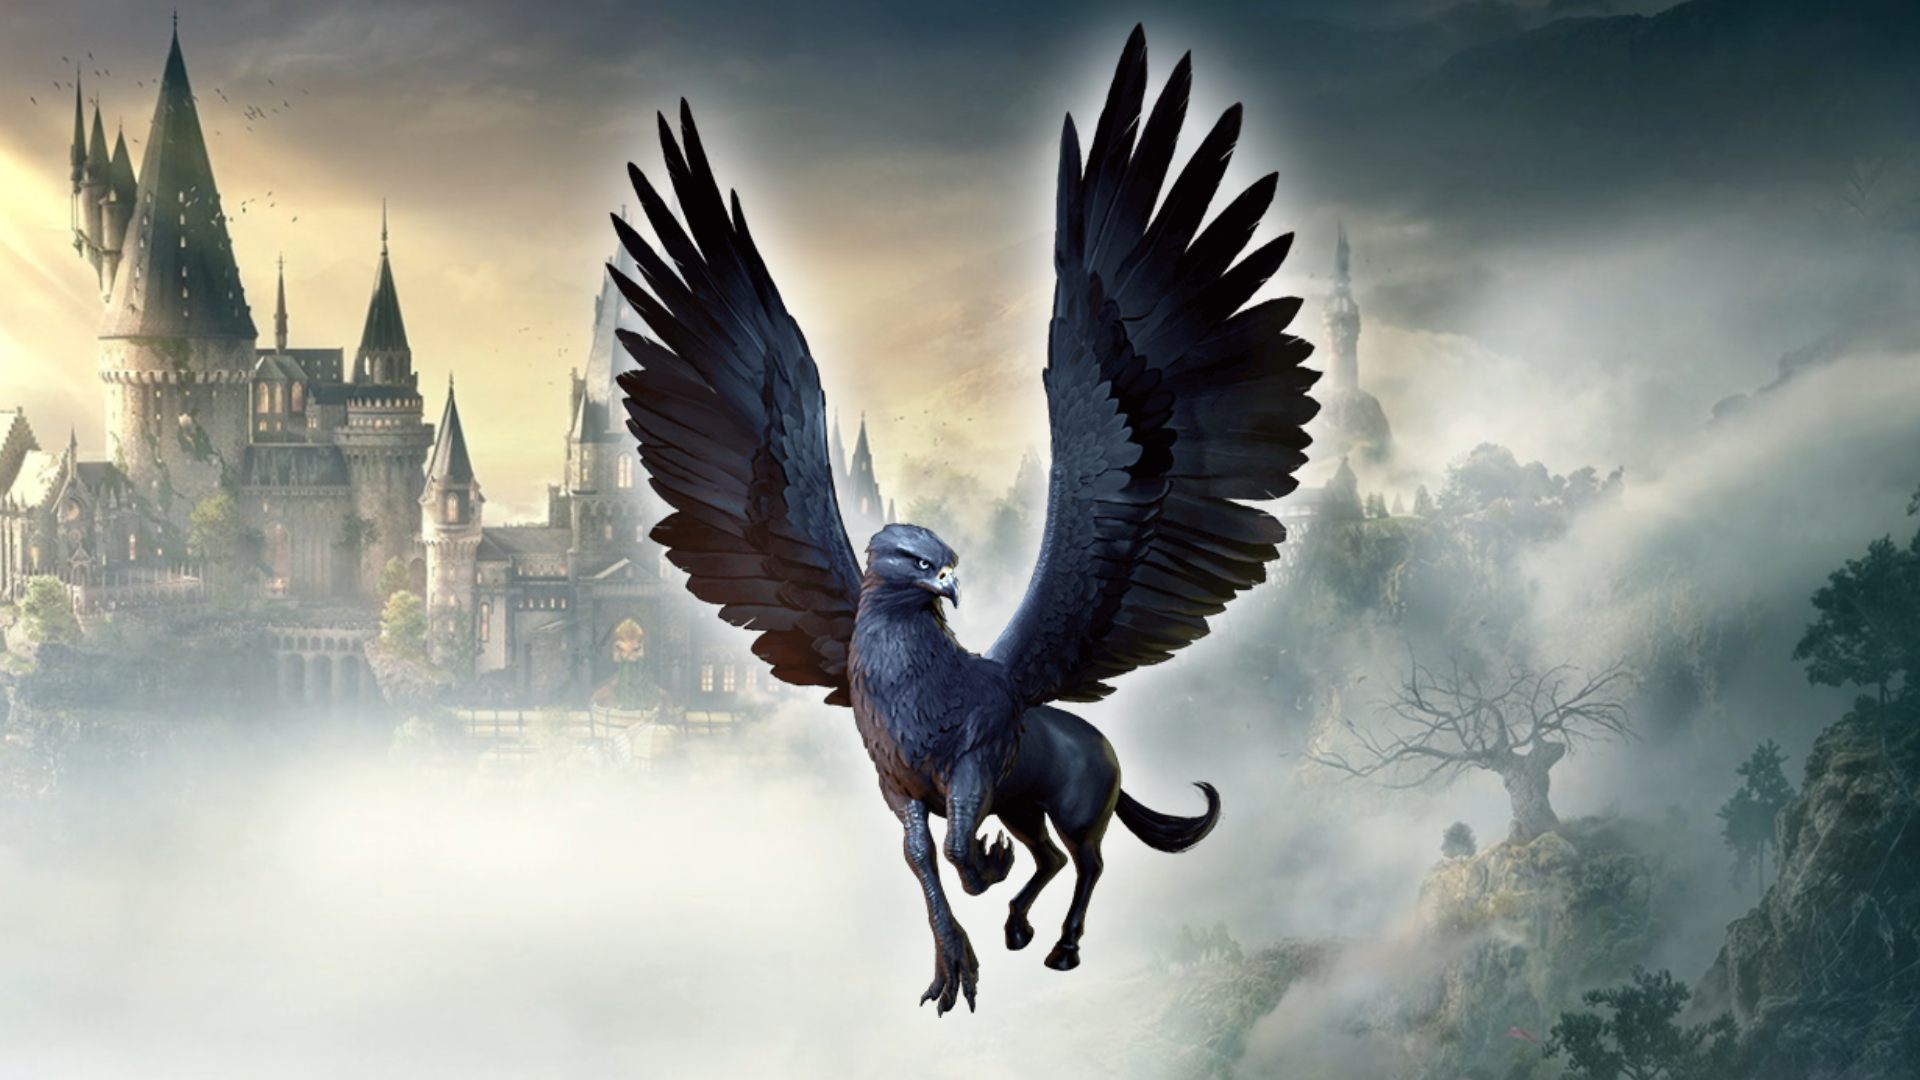 Hogwarts Legacy system requirements